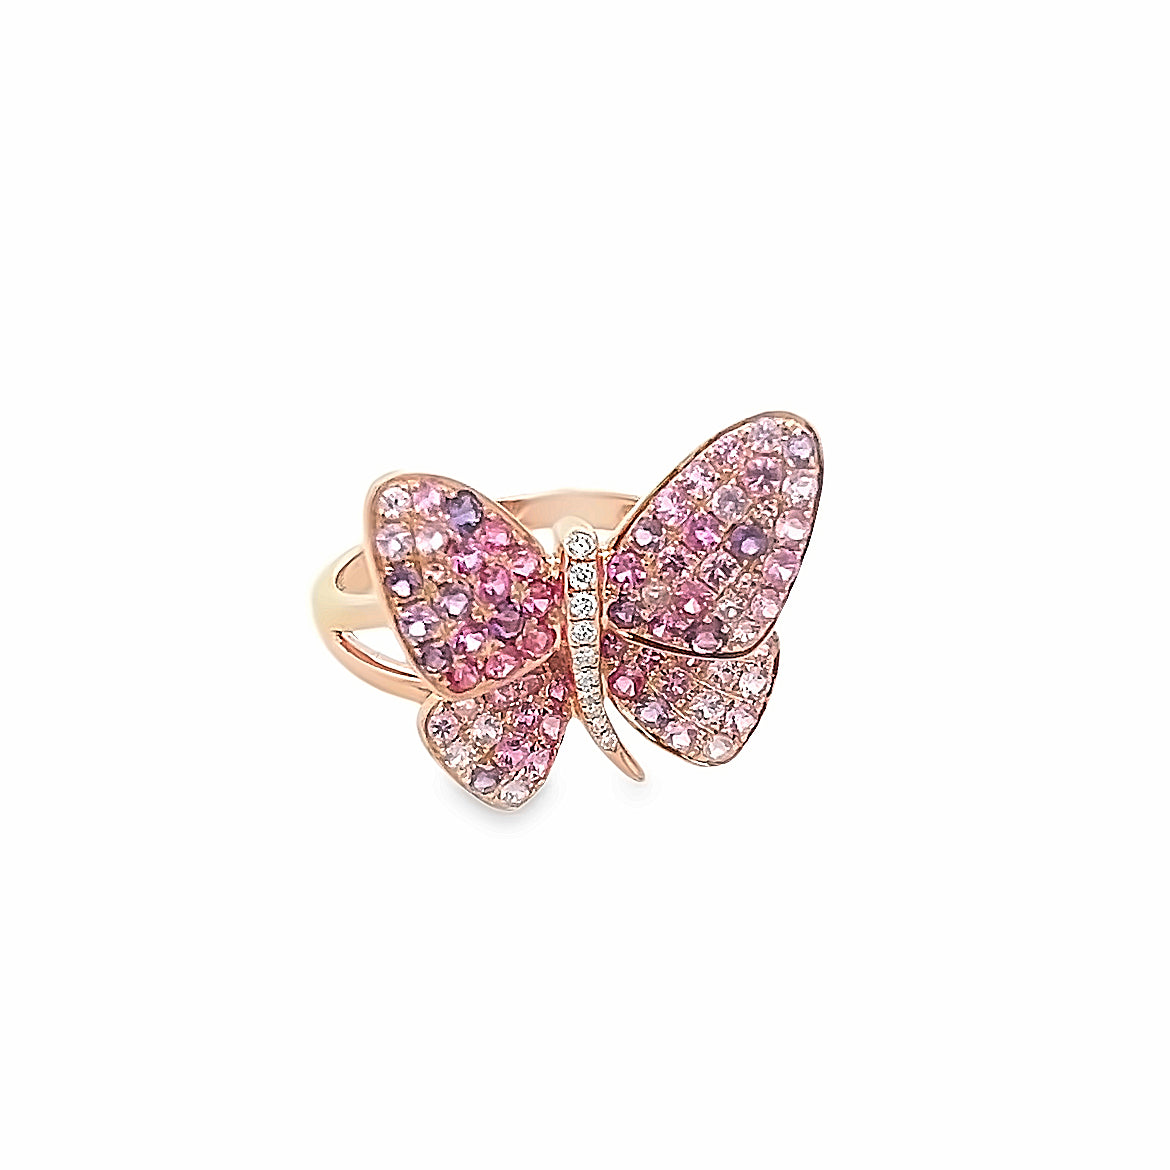 18K ROSE GOLD BUTTERFLY RING WITH PINK SAPPHIRE